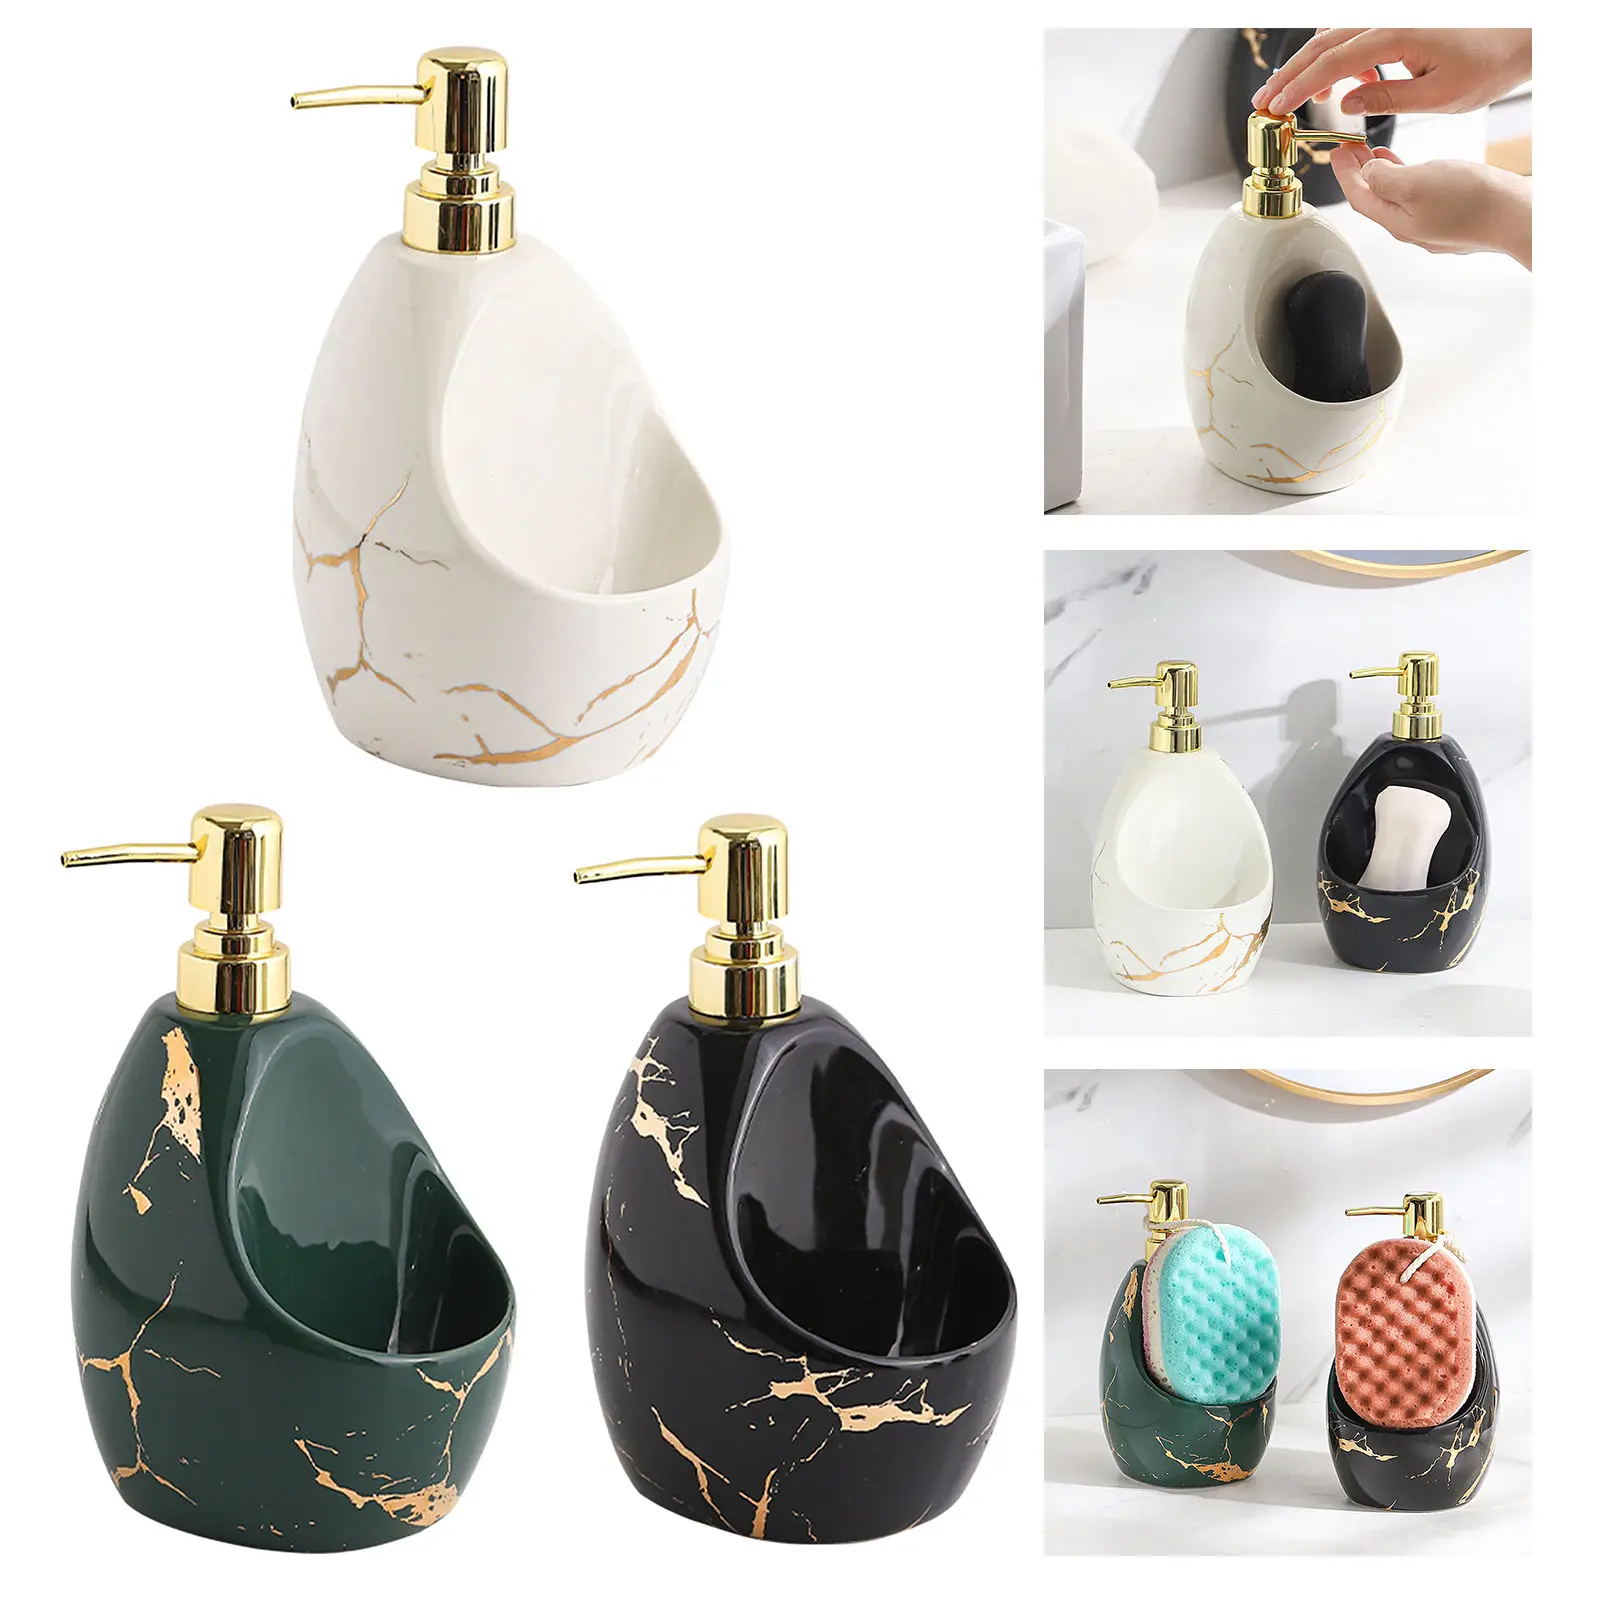 Soap Dispenser with Sponge Holder Ceramic Marble Look 2 in 1 Modern Caddy Organizer for Countertop Kids